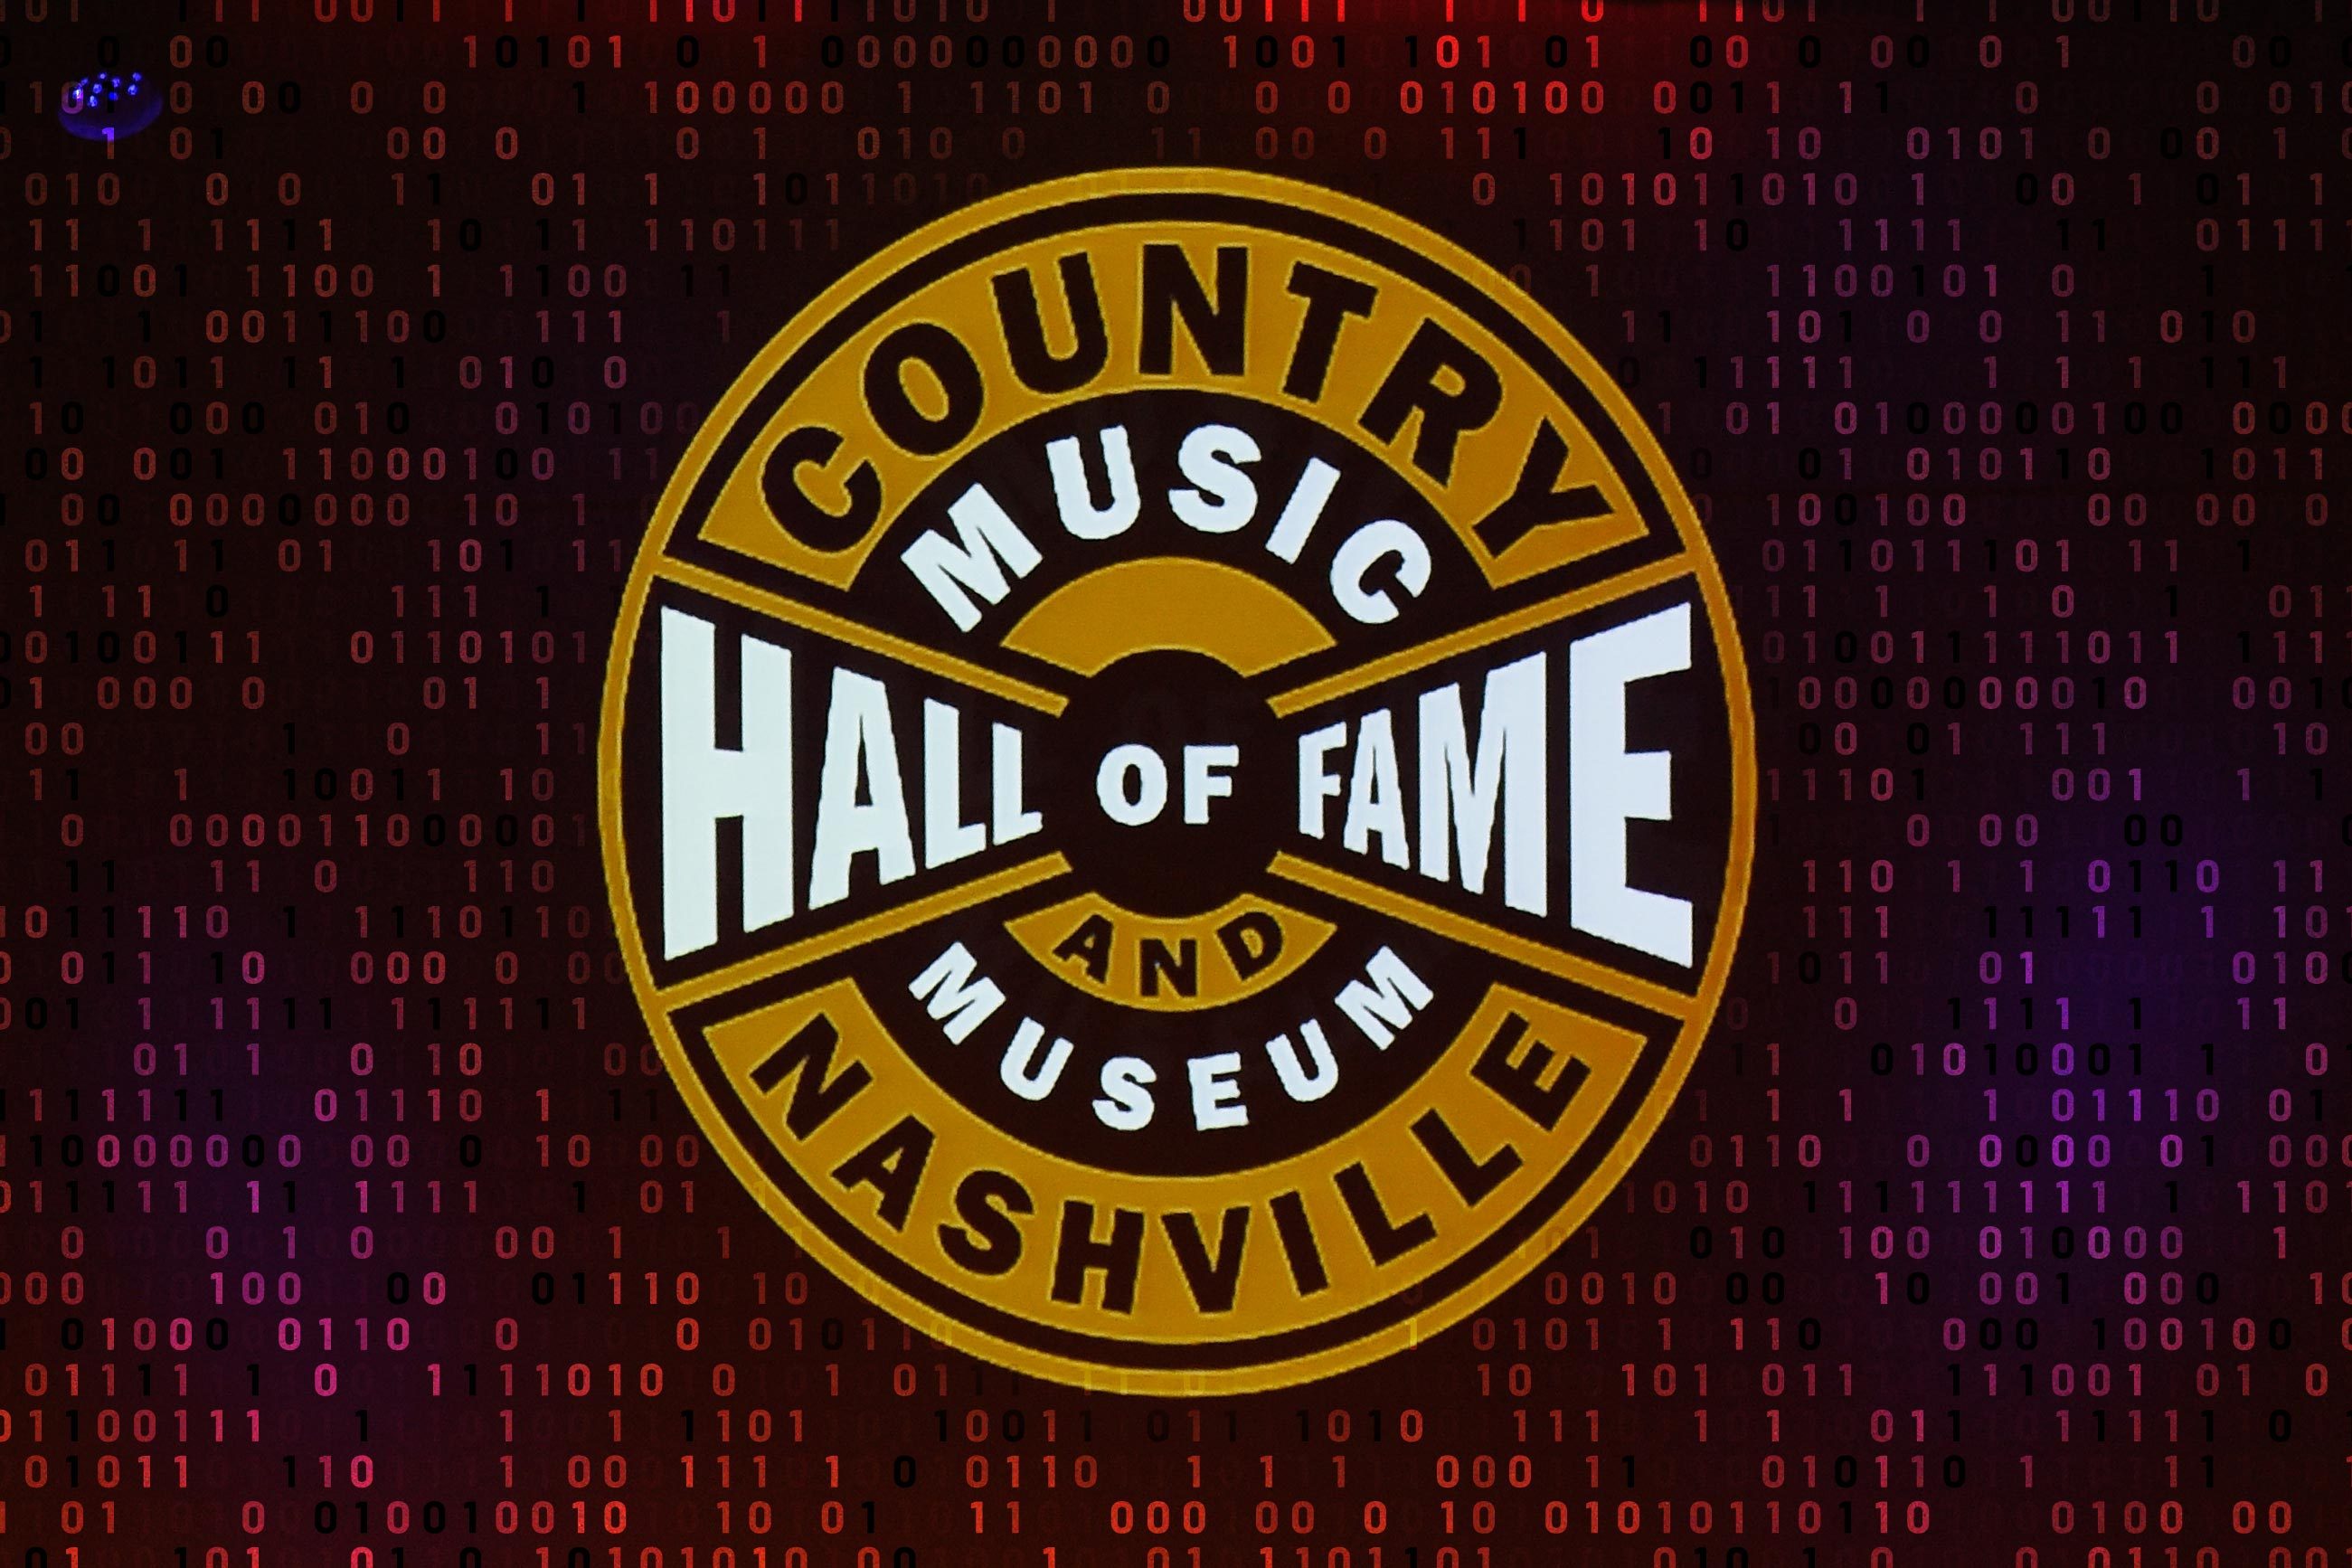 nashville country music hall of fame and museum logo with computer code overlay